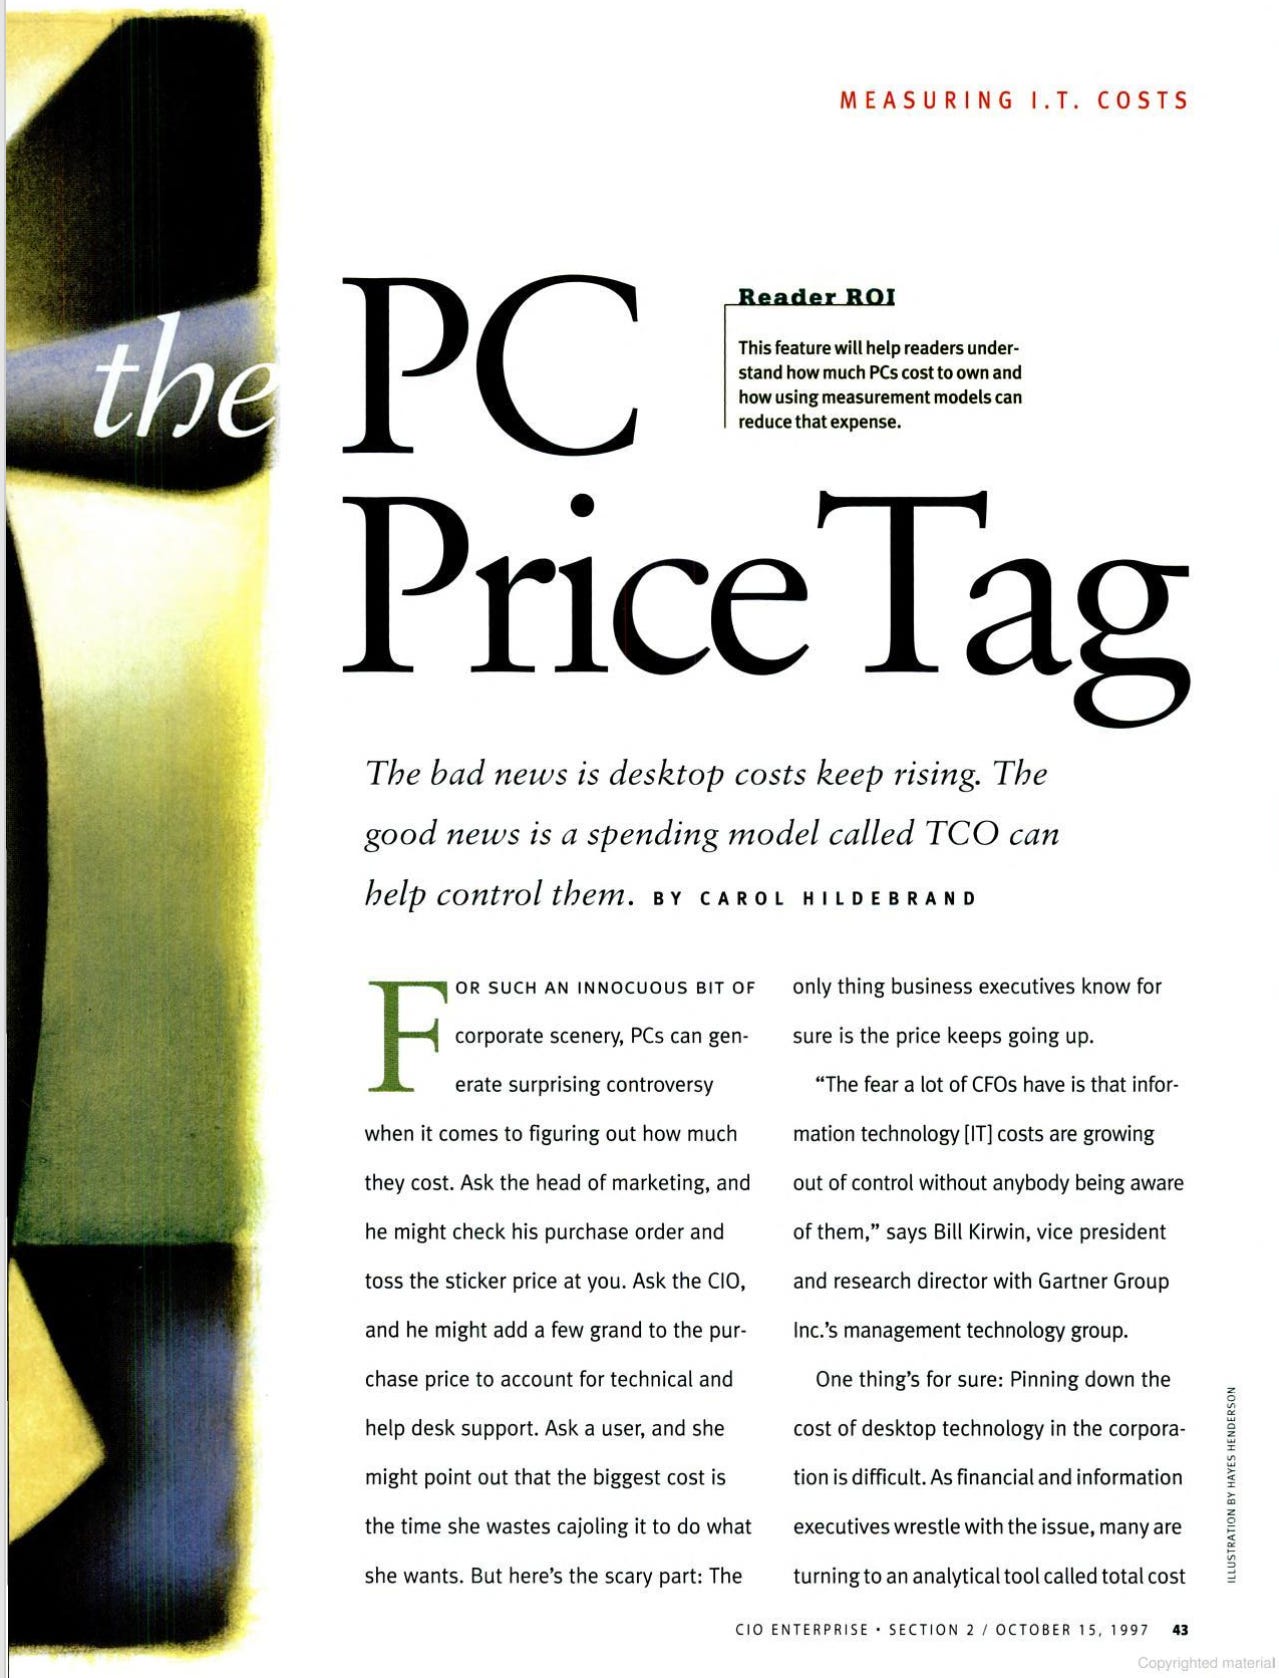 The PC Price Tag "The bad news is desktop costs keep rising. The good news is a spending model called TCO can help control them"